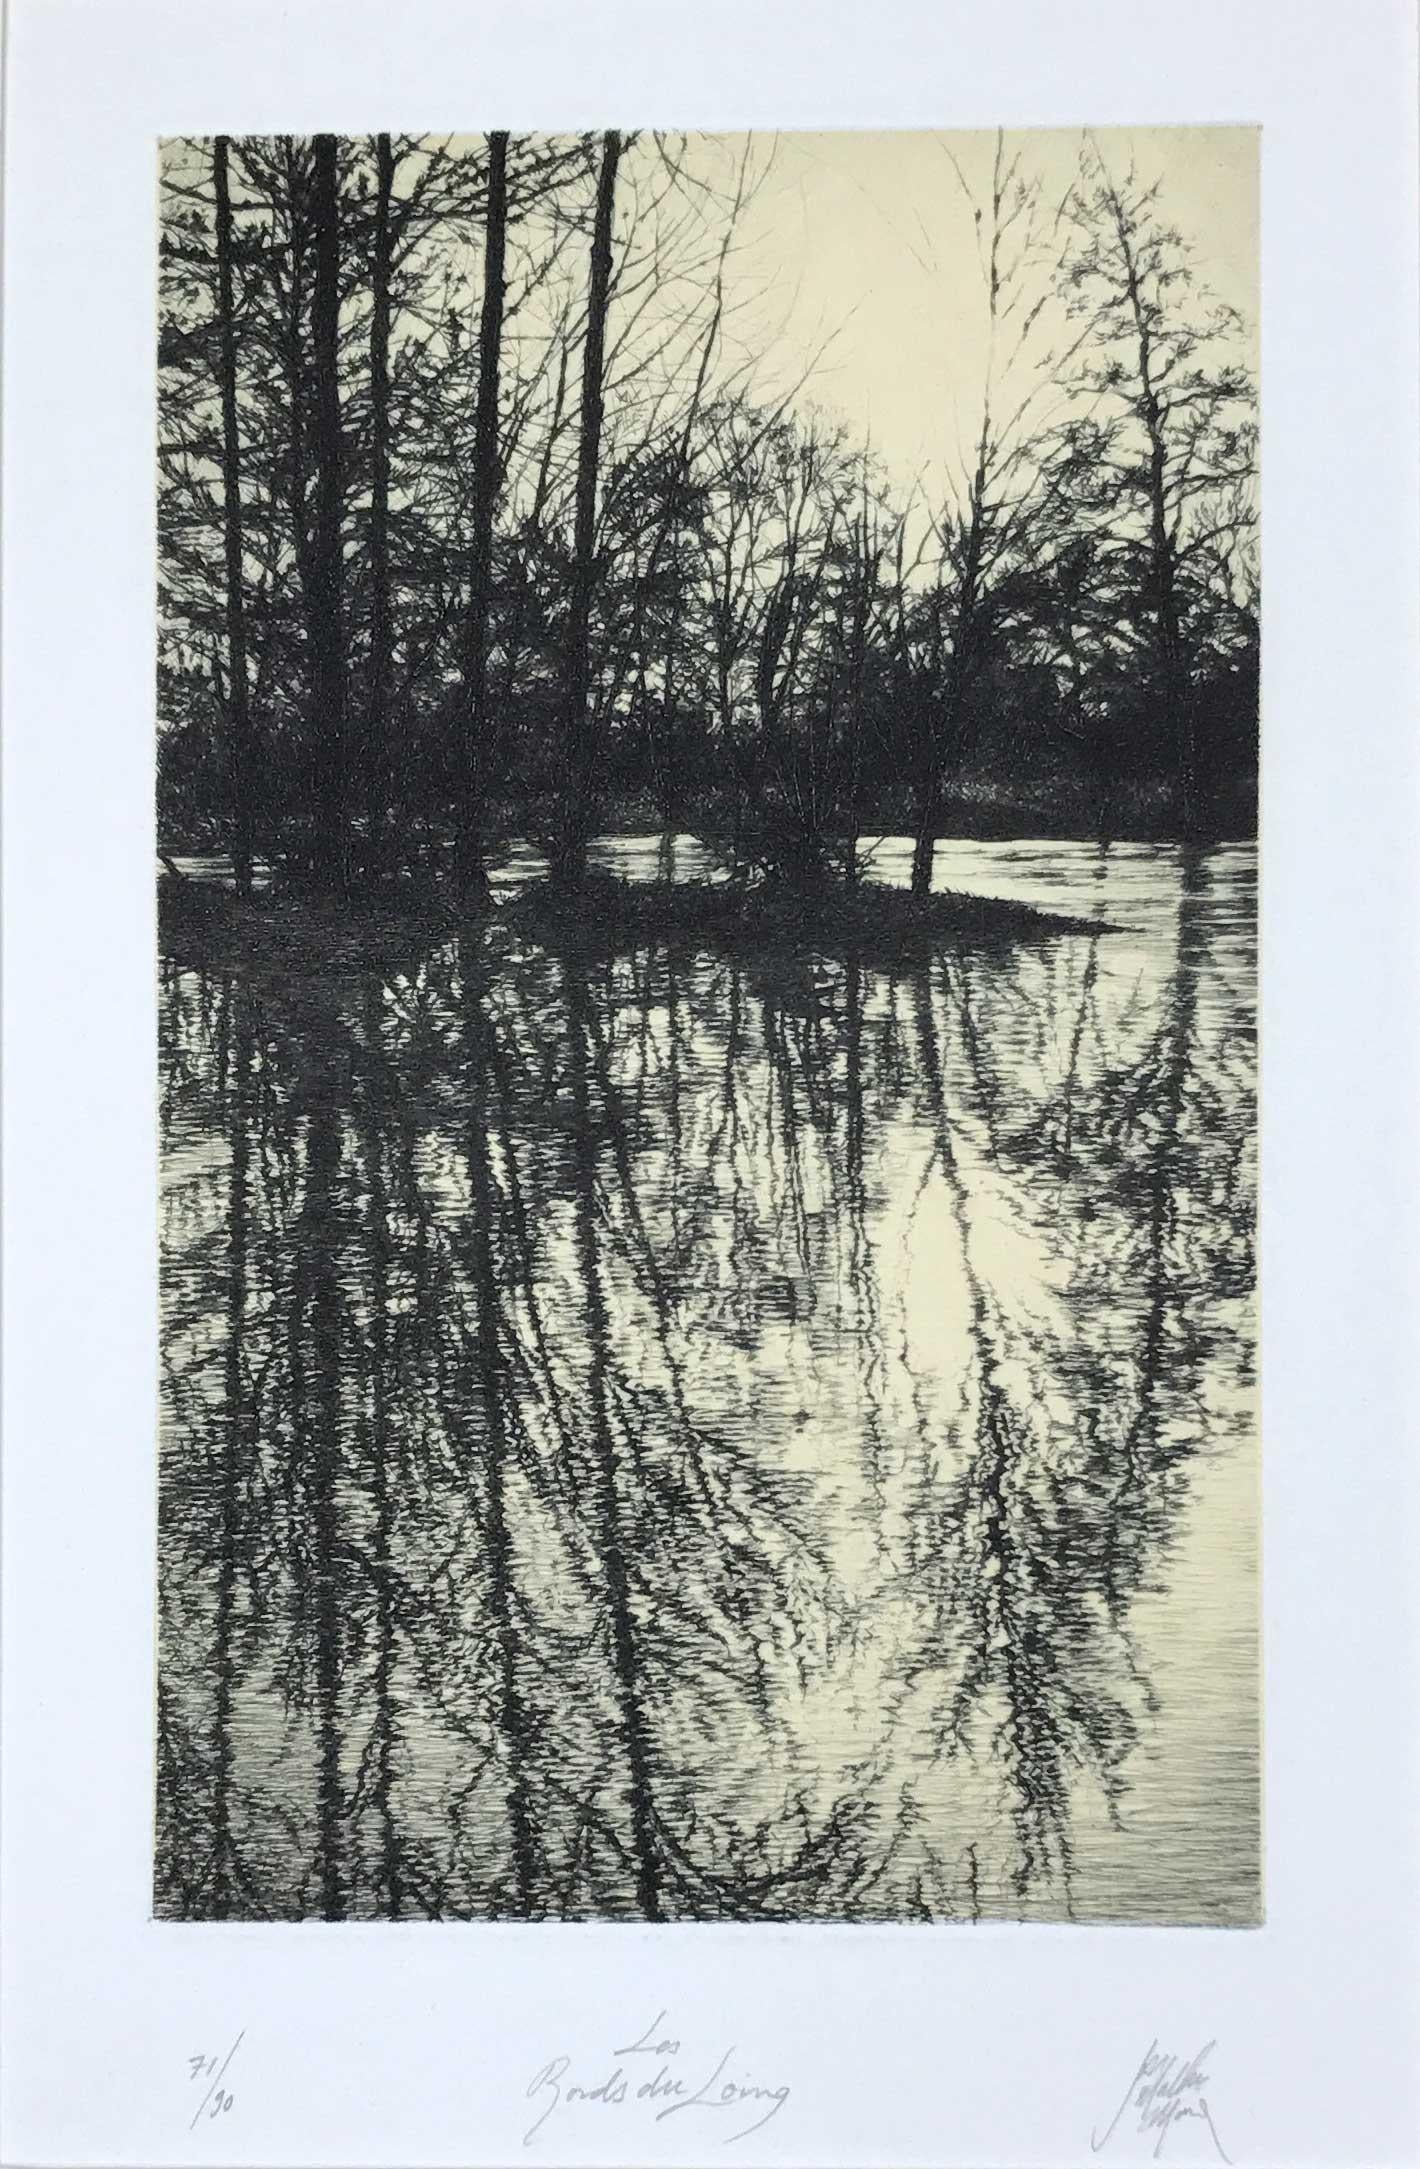 Signed, titled and numbered, from the edition of 90. ripples on a body of water reflect the trees in this French countryside landscape.

Mathieux-Marie was born in Paris in 1947 and has been honored throughout his career with awards and exhibitions.